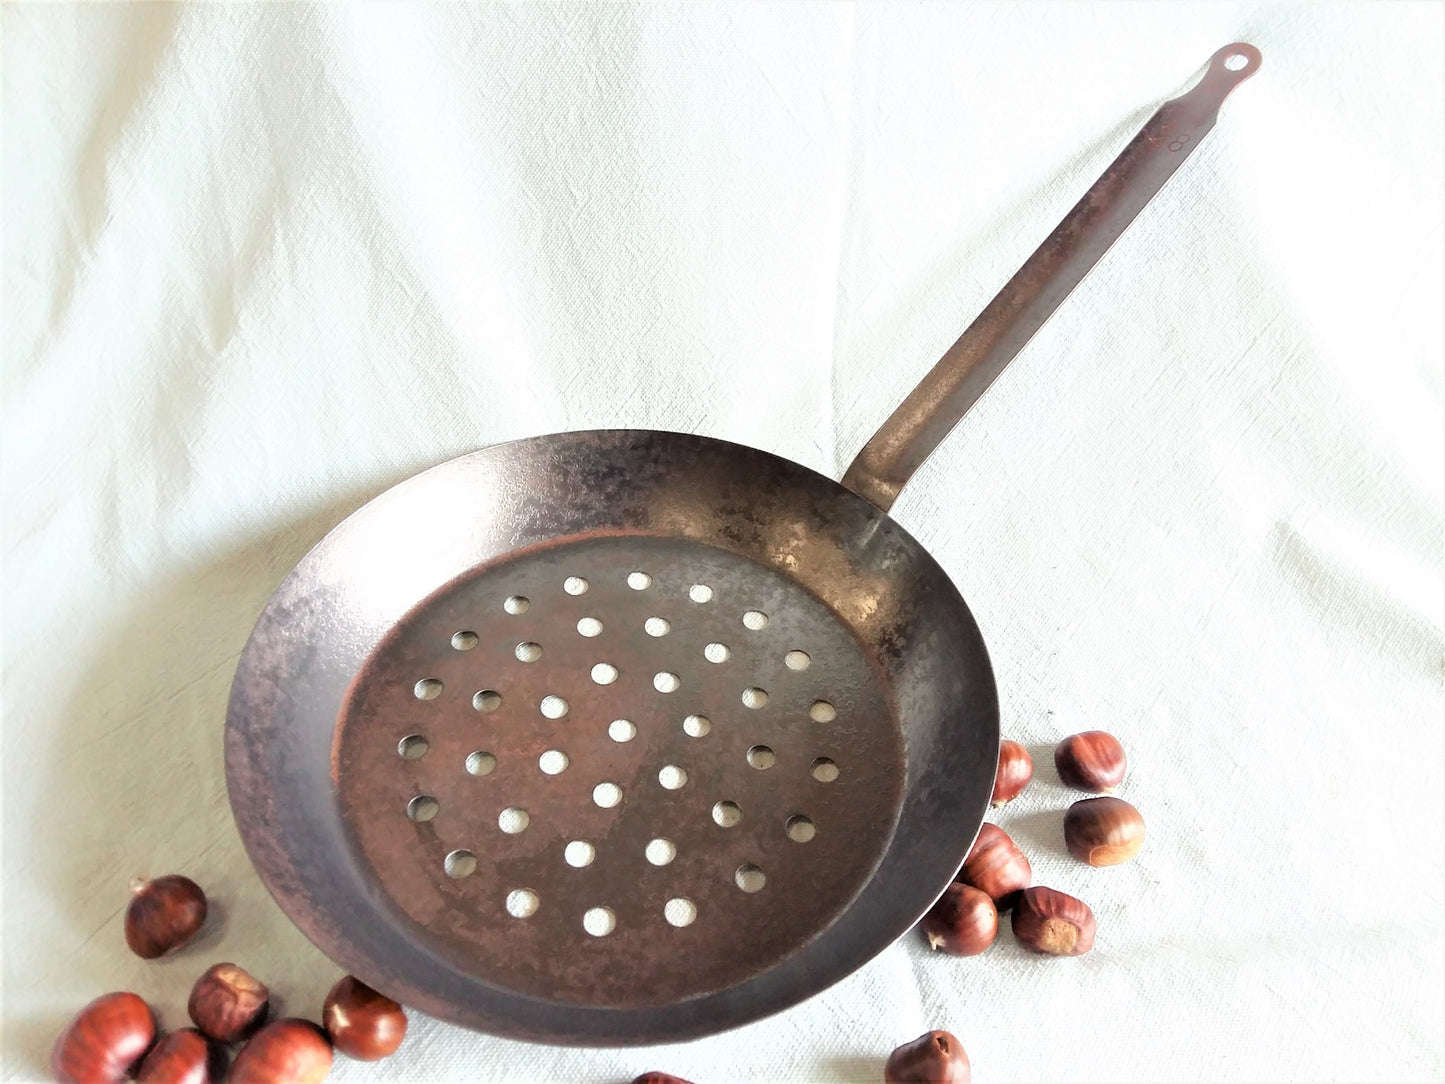 Vintage Iron and Wood Chestnut Roasting Pans, 20th Century For Sale at  1stDibs